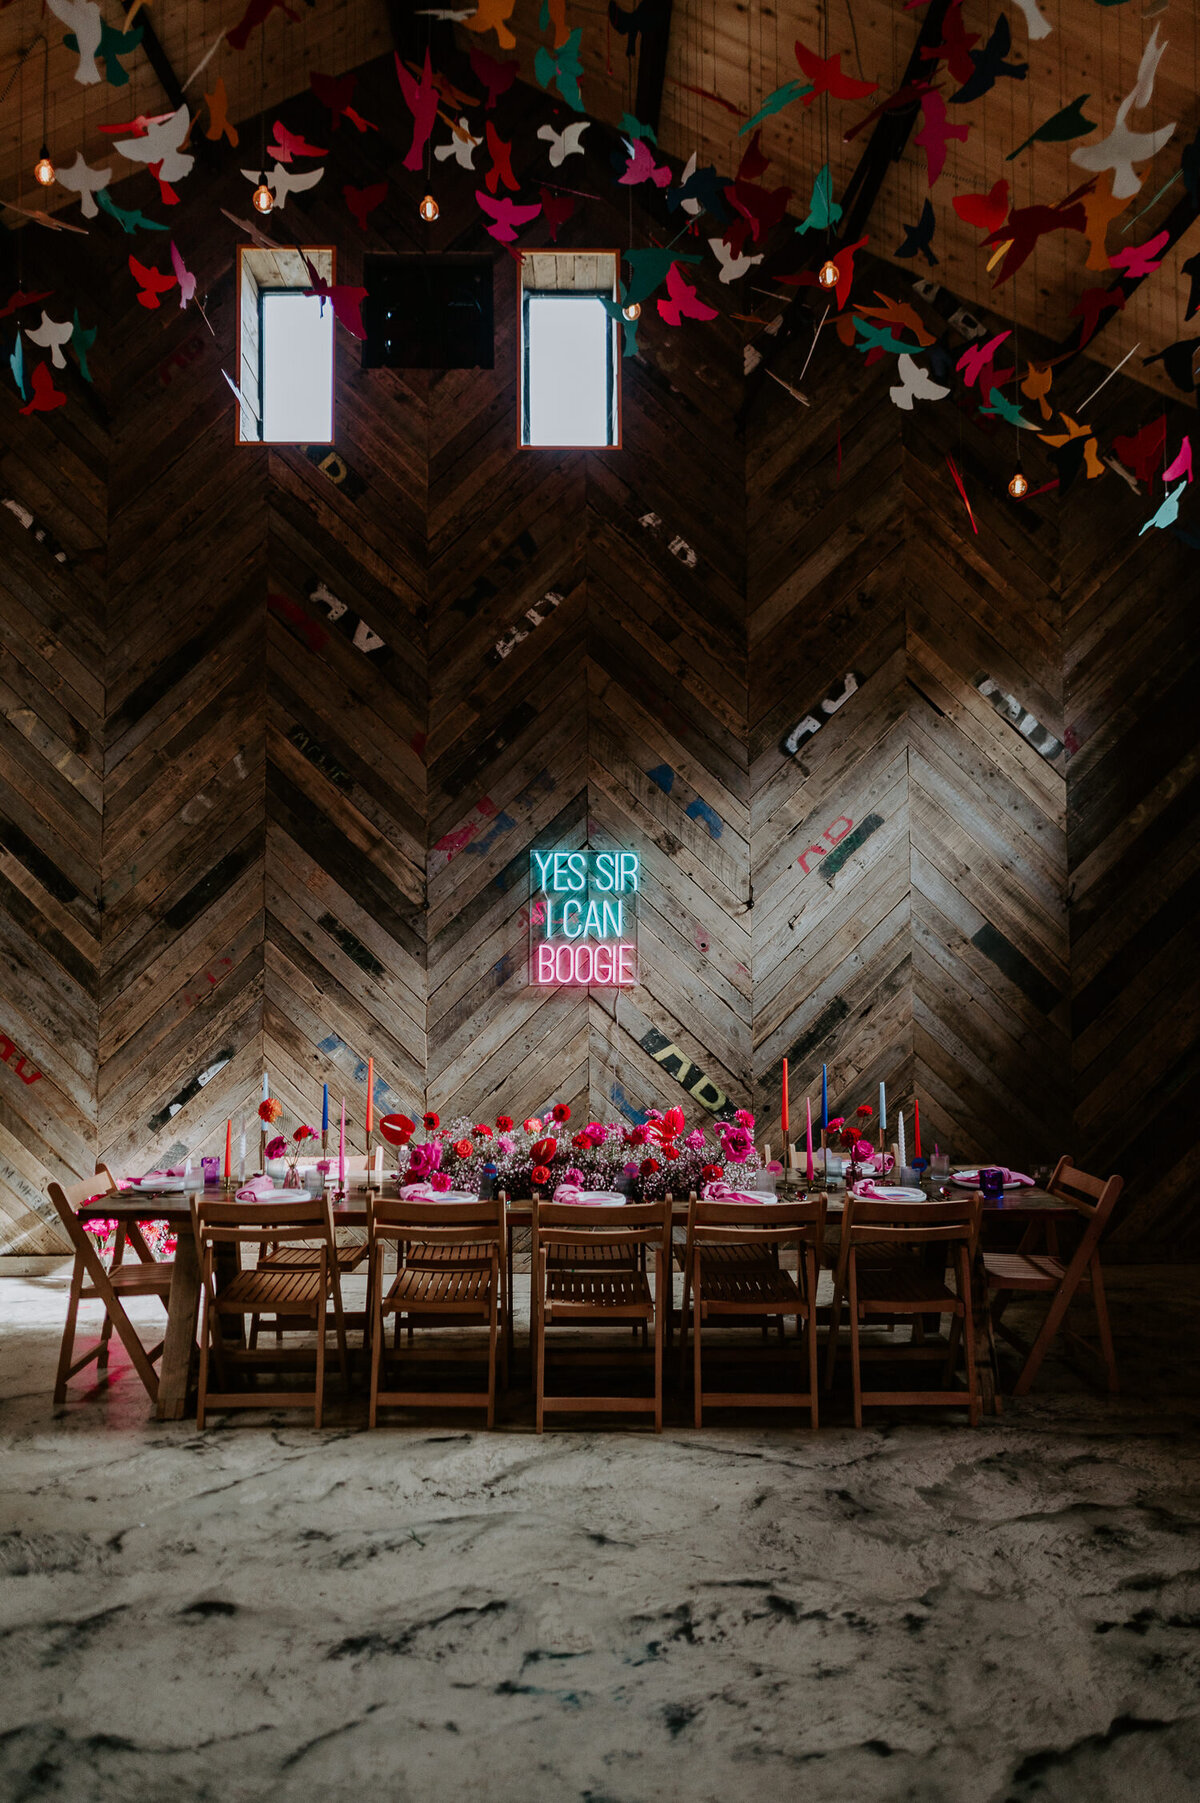 Pink wedding styling at The Canary Shed. A pink and blue neon which reads Yes Sir I Can Boogie hangs above a large dressed table. The disco themed wedding has a strong pink and purple theme.